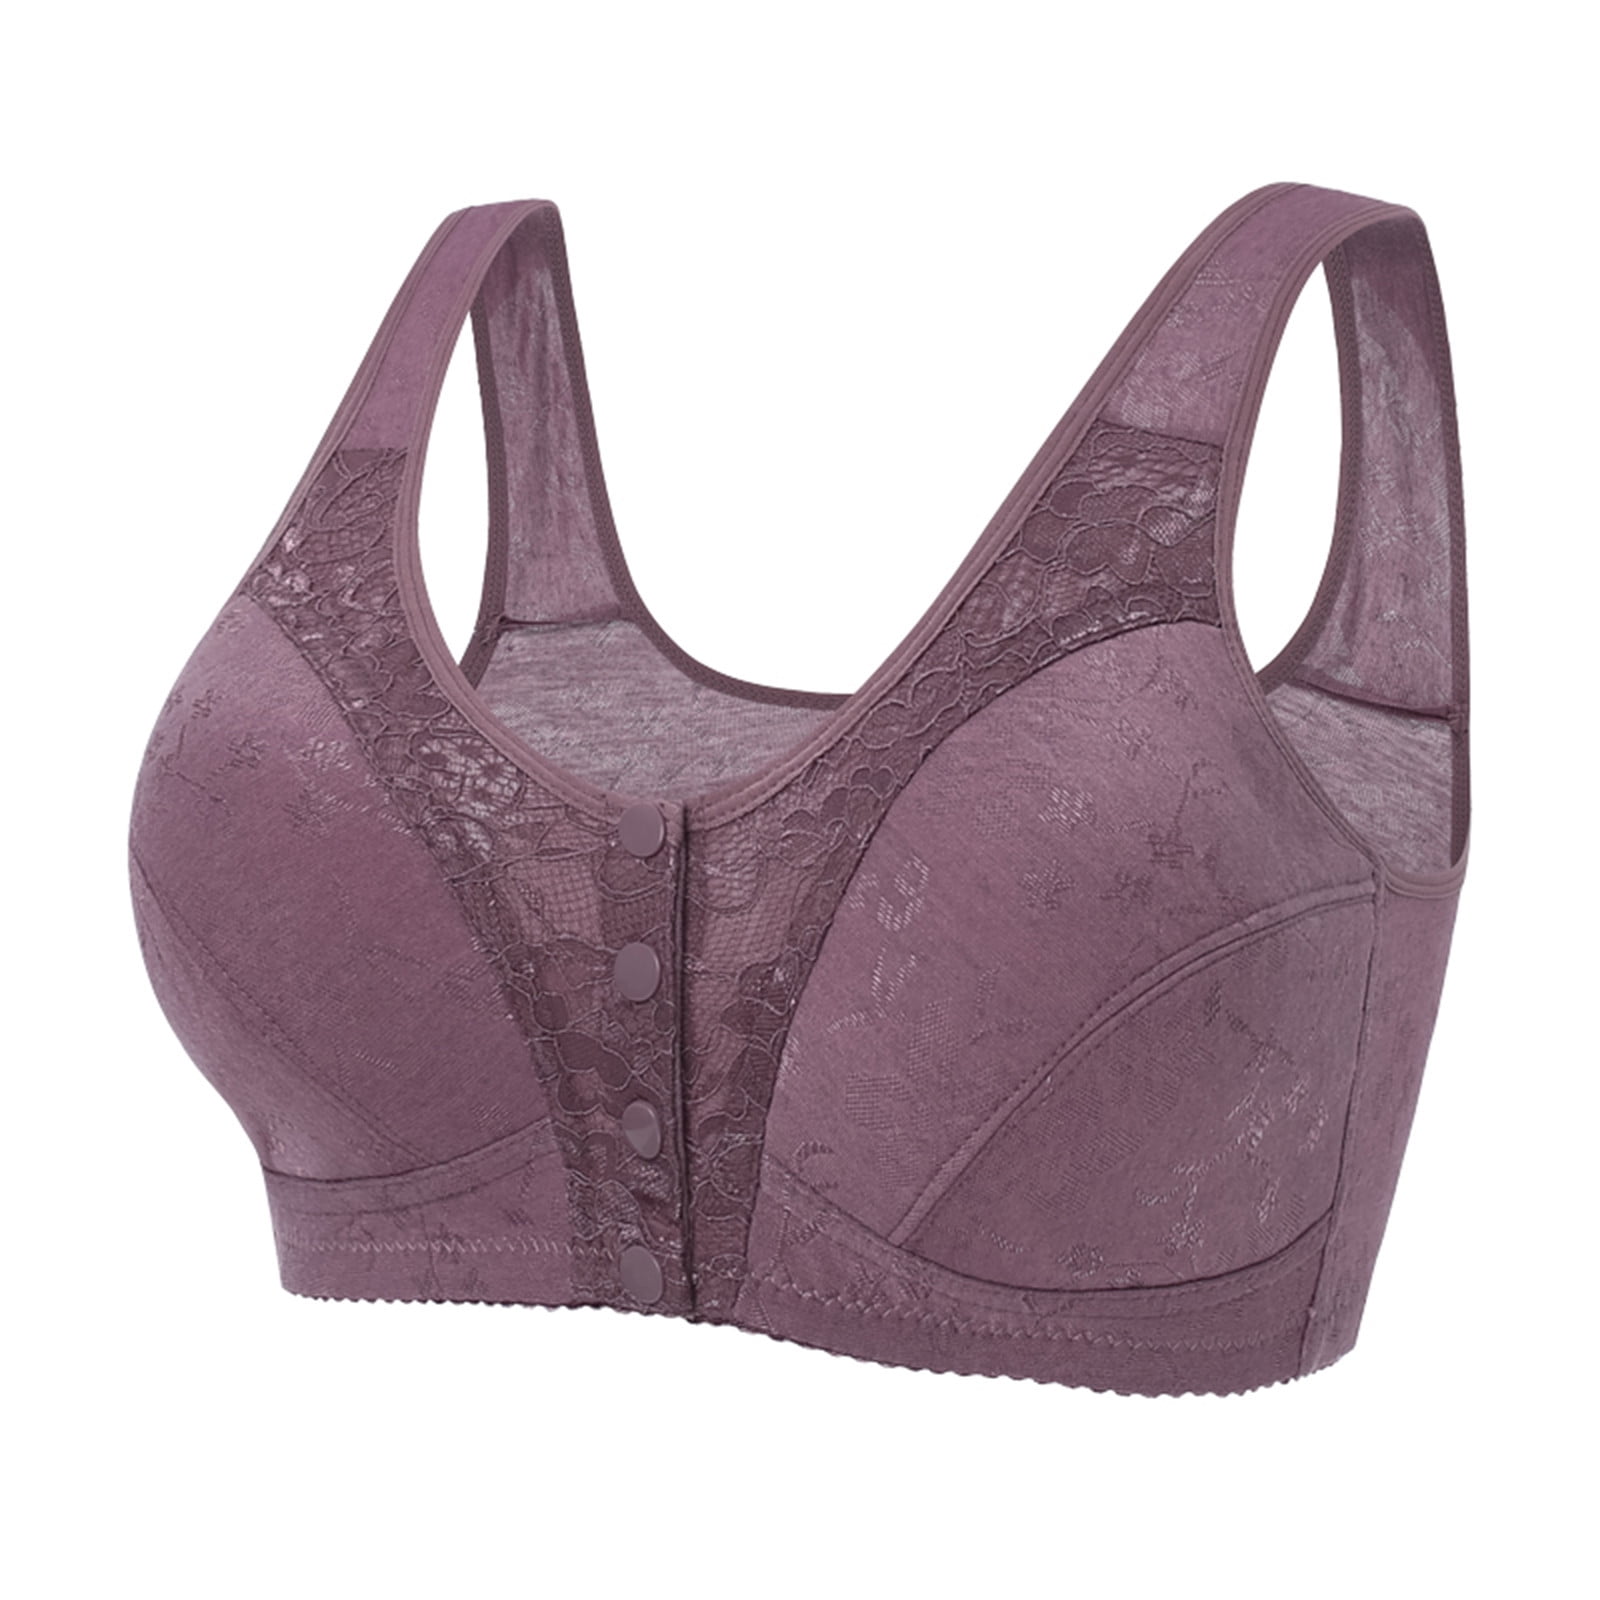 Promo Energized Sports Bra Dual Layer Seamless Knit 201-1093S - Maroon  Purple, XL - Kab. Tangerang - Energized Official